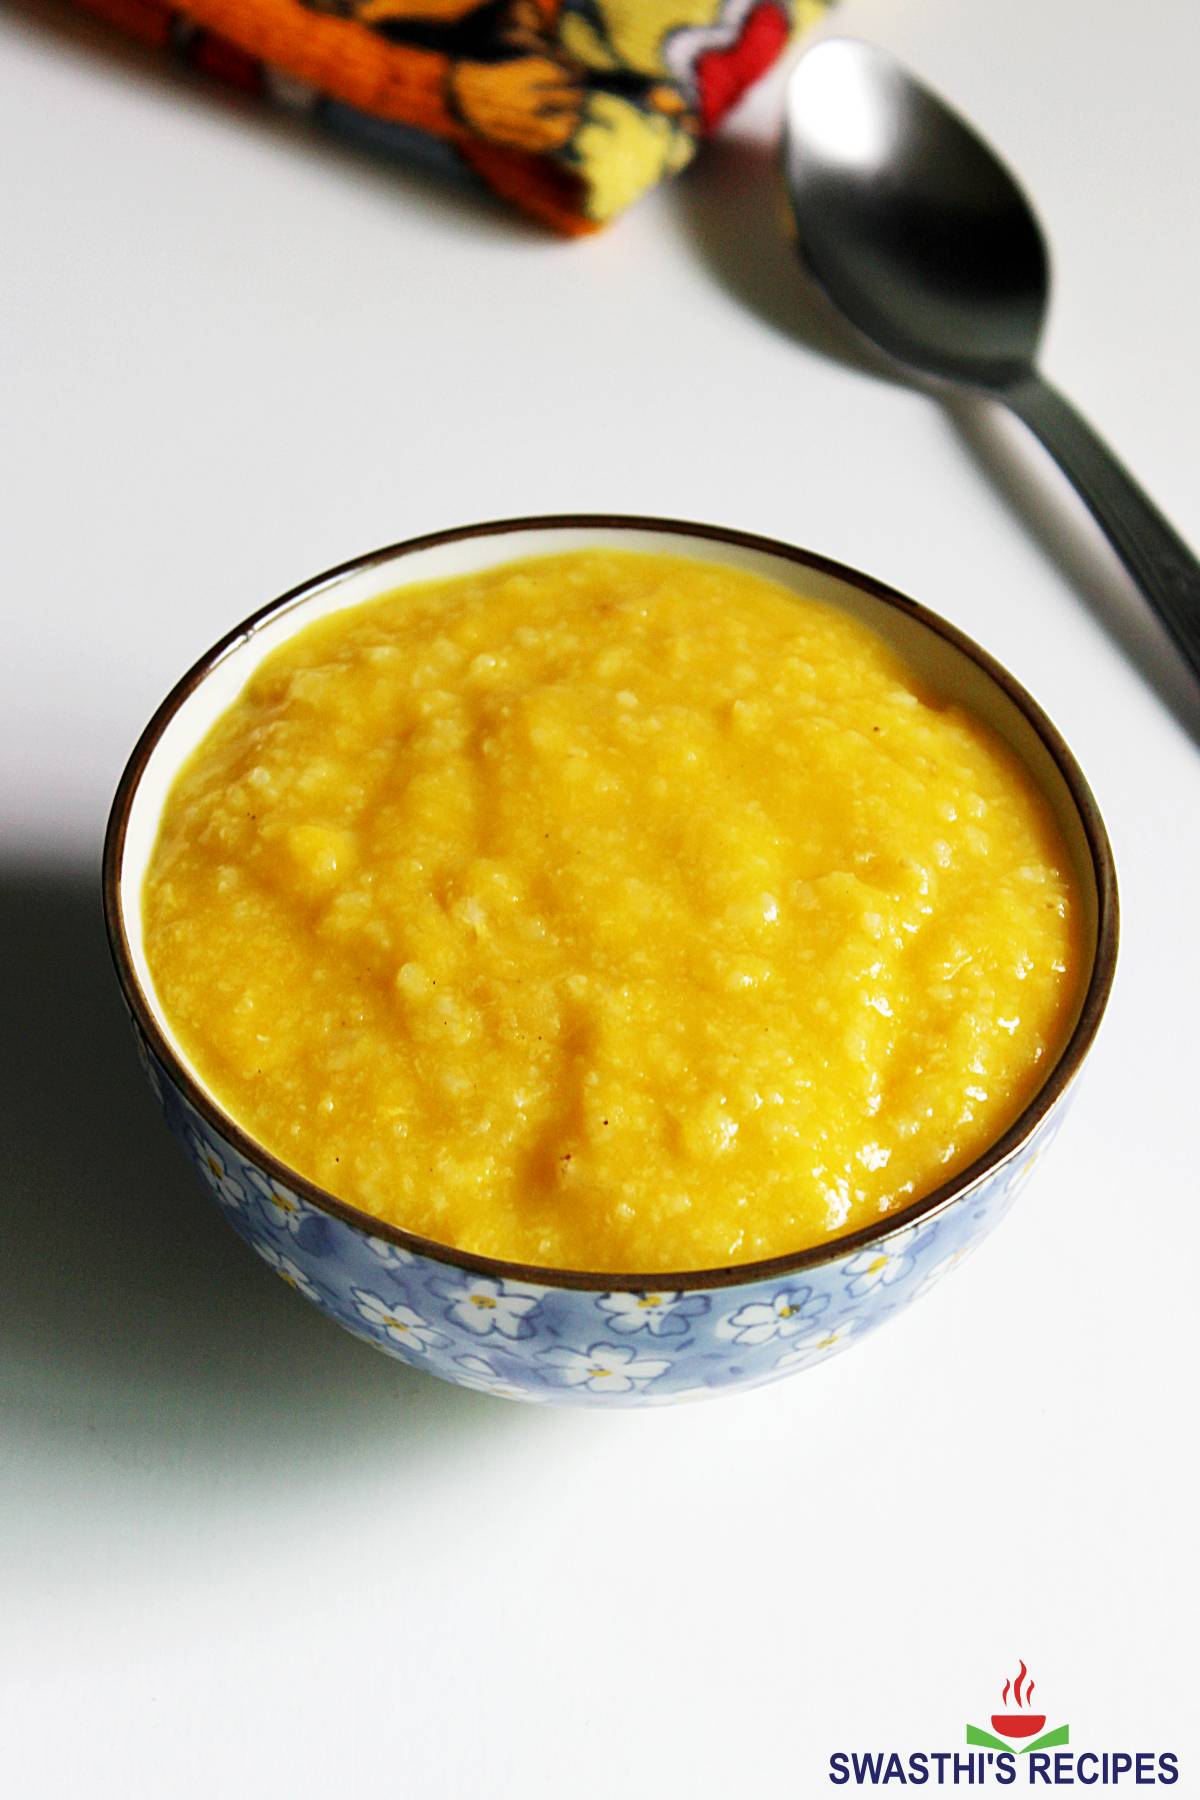 Baby Food Making Supplies: Top Picks for Making Homemade Baby Food